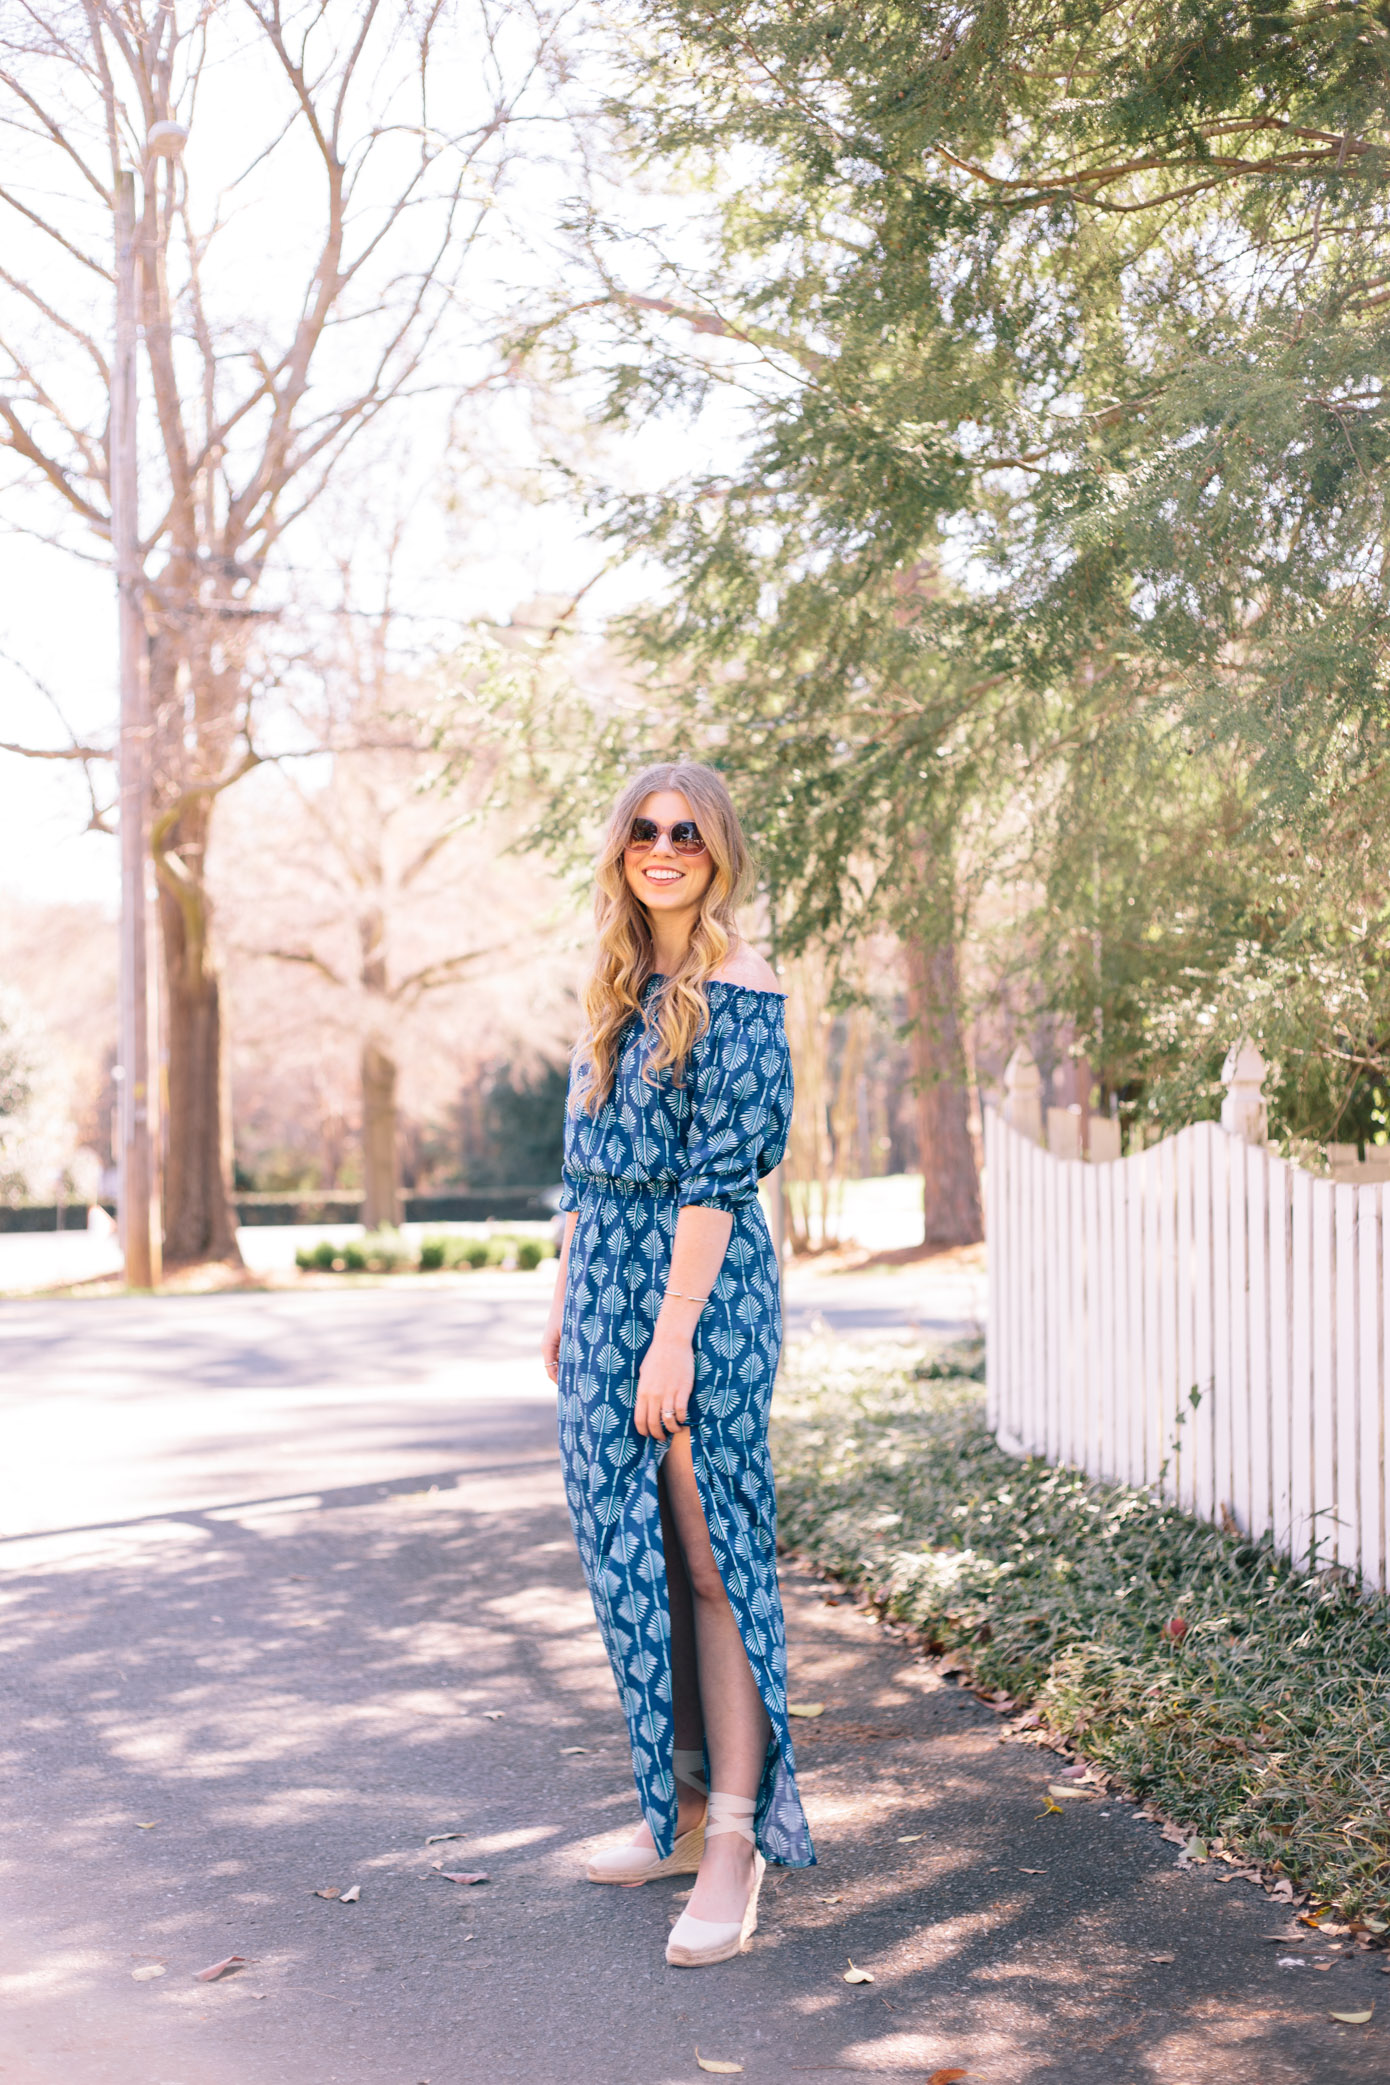 Blue Off the Shoulder Maxi Dress for Spring | Louella Reese Life & Style Blog 